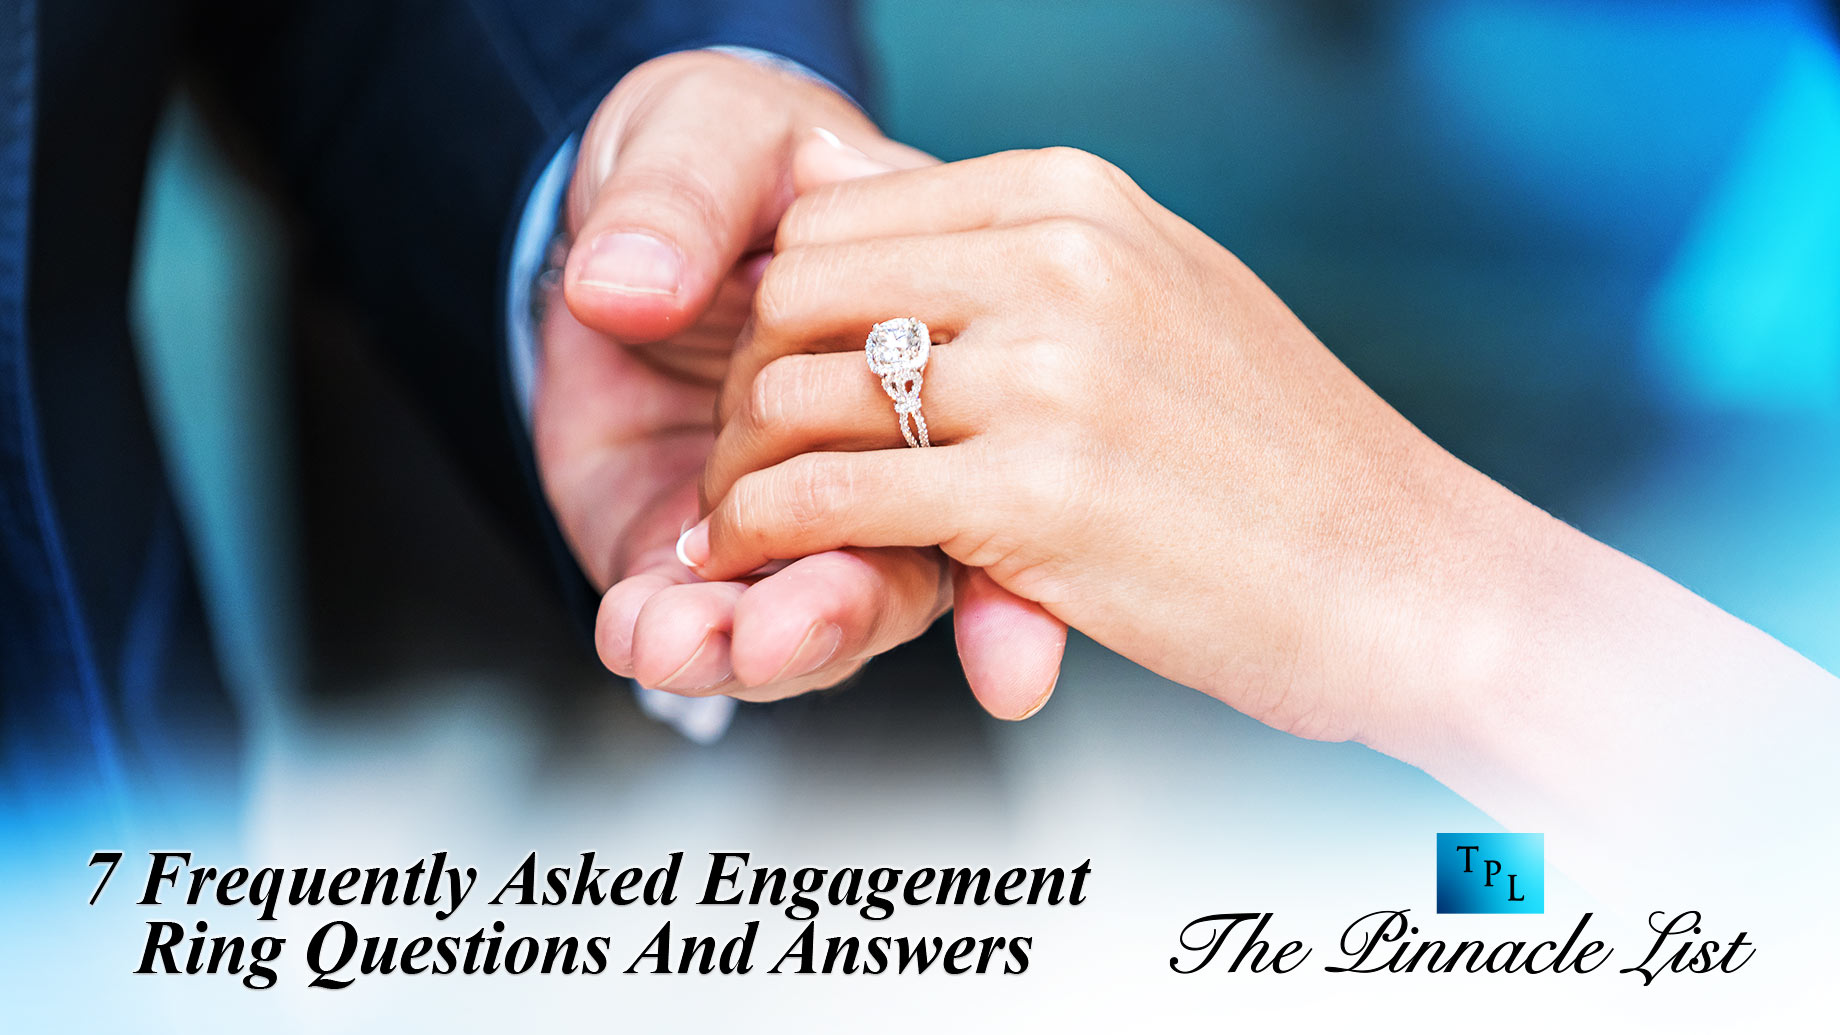 7 Frequently Asked Engagement Ring Questions And Answers